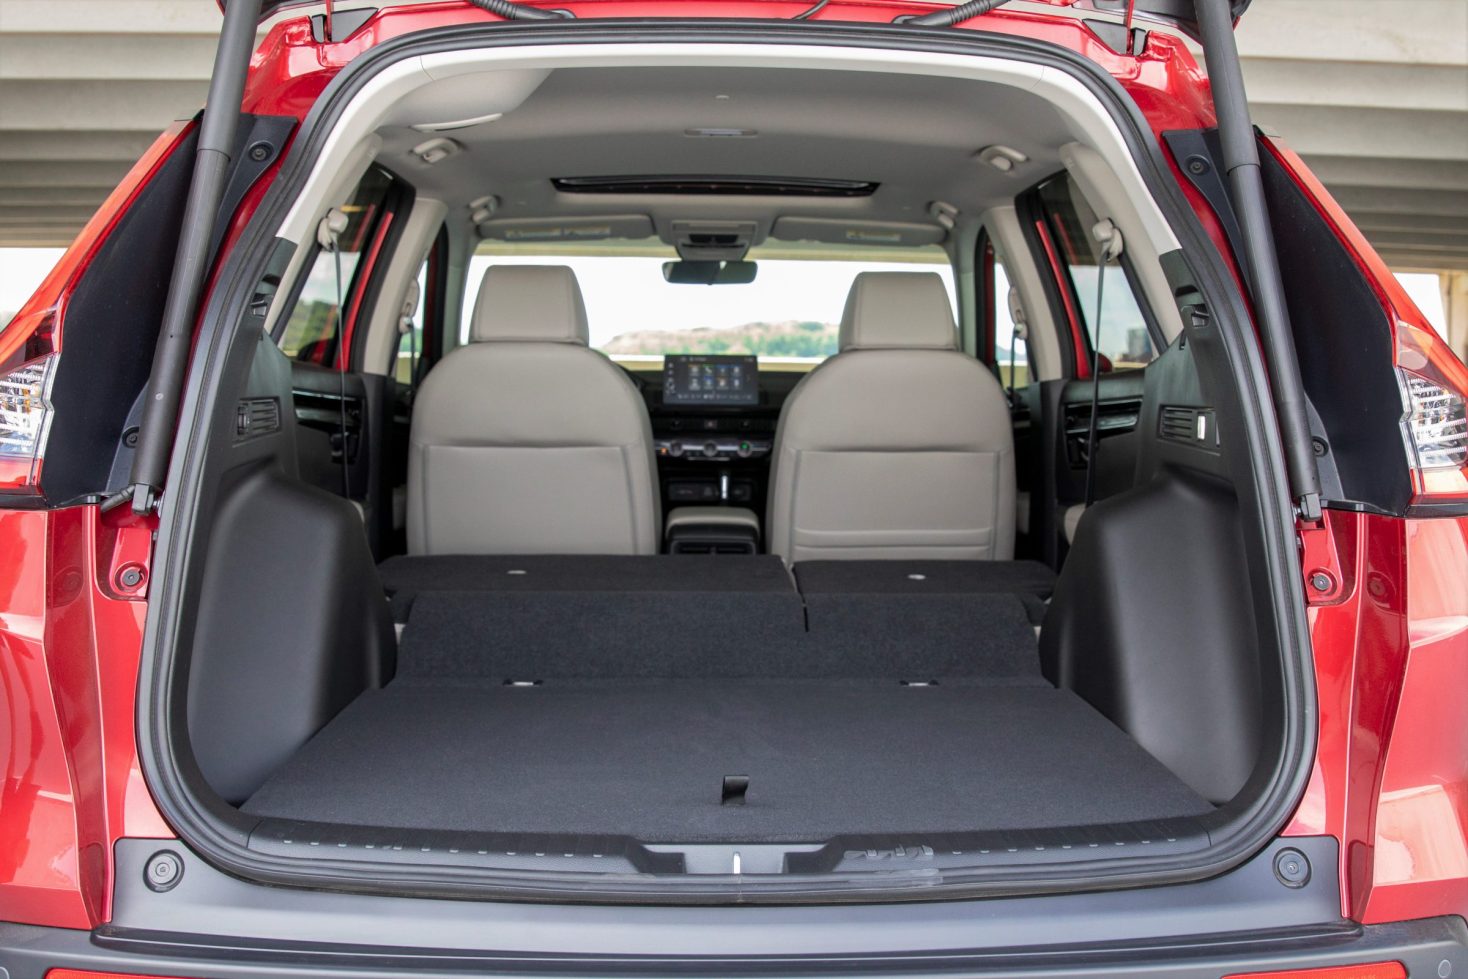 What’s the Total Available Cargo Space of the 2023 Honda CR-V?